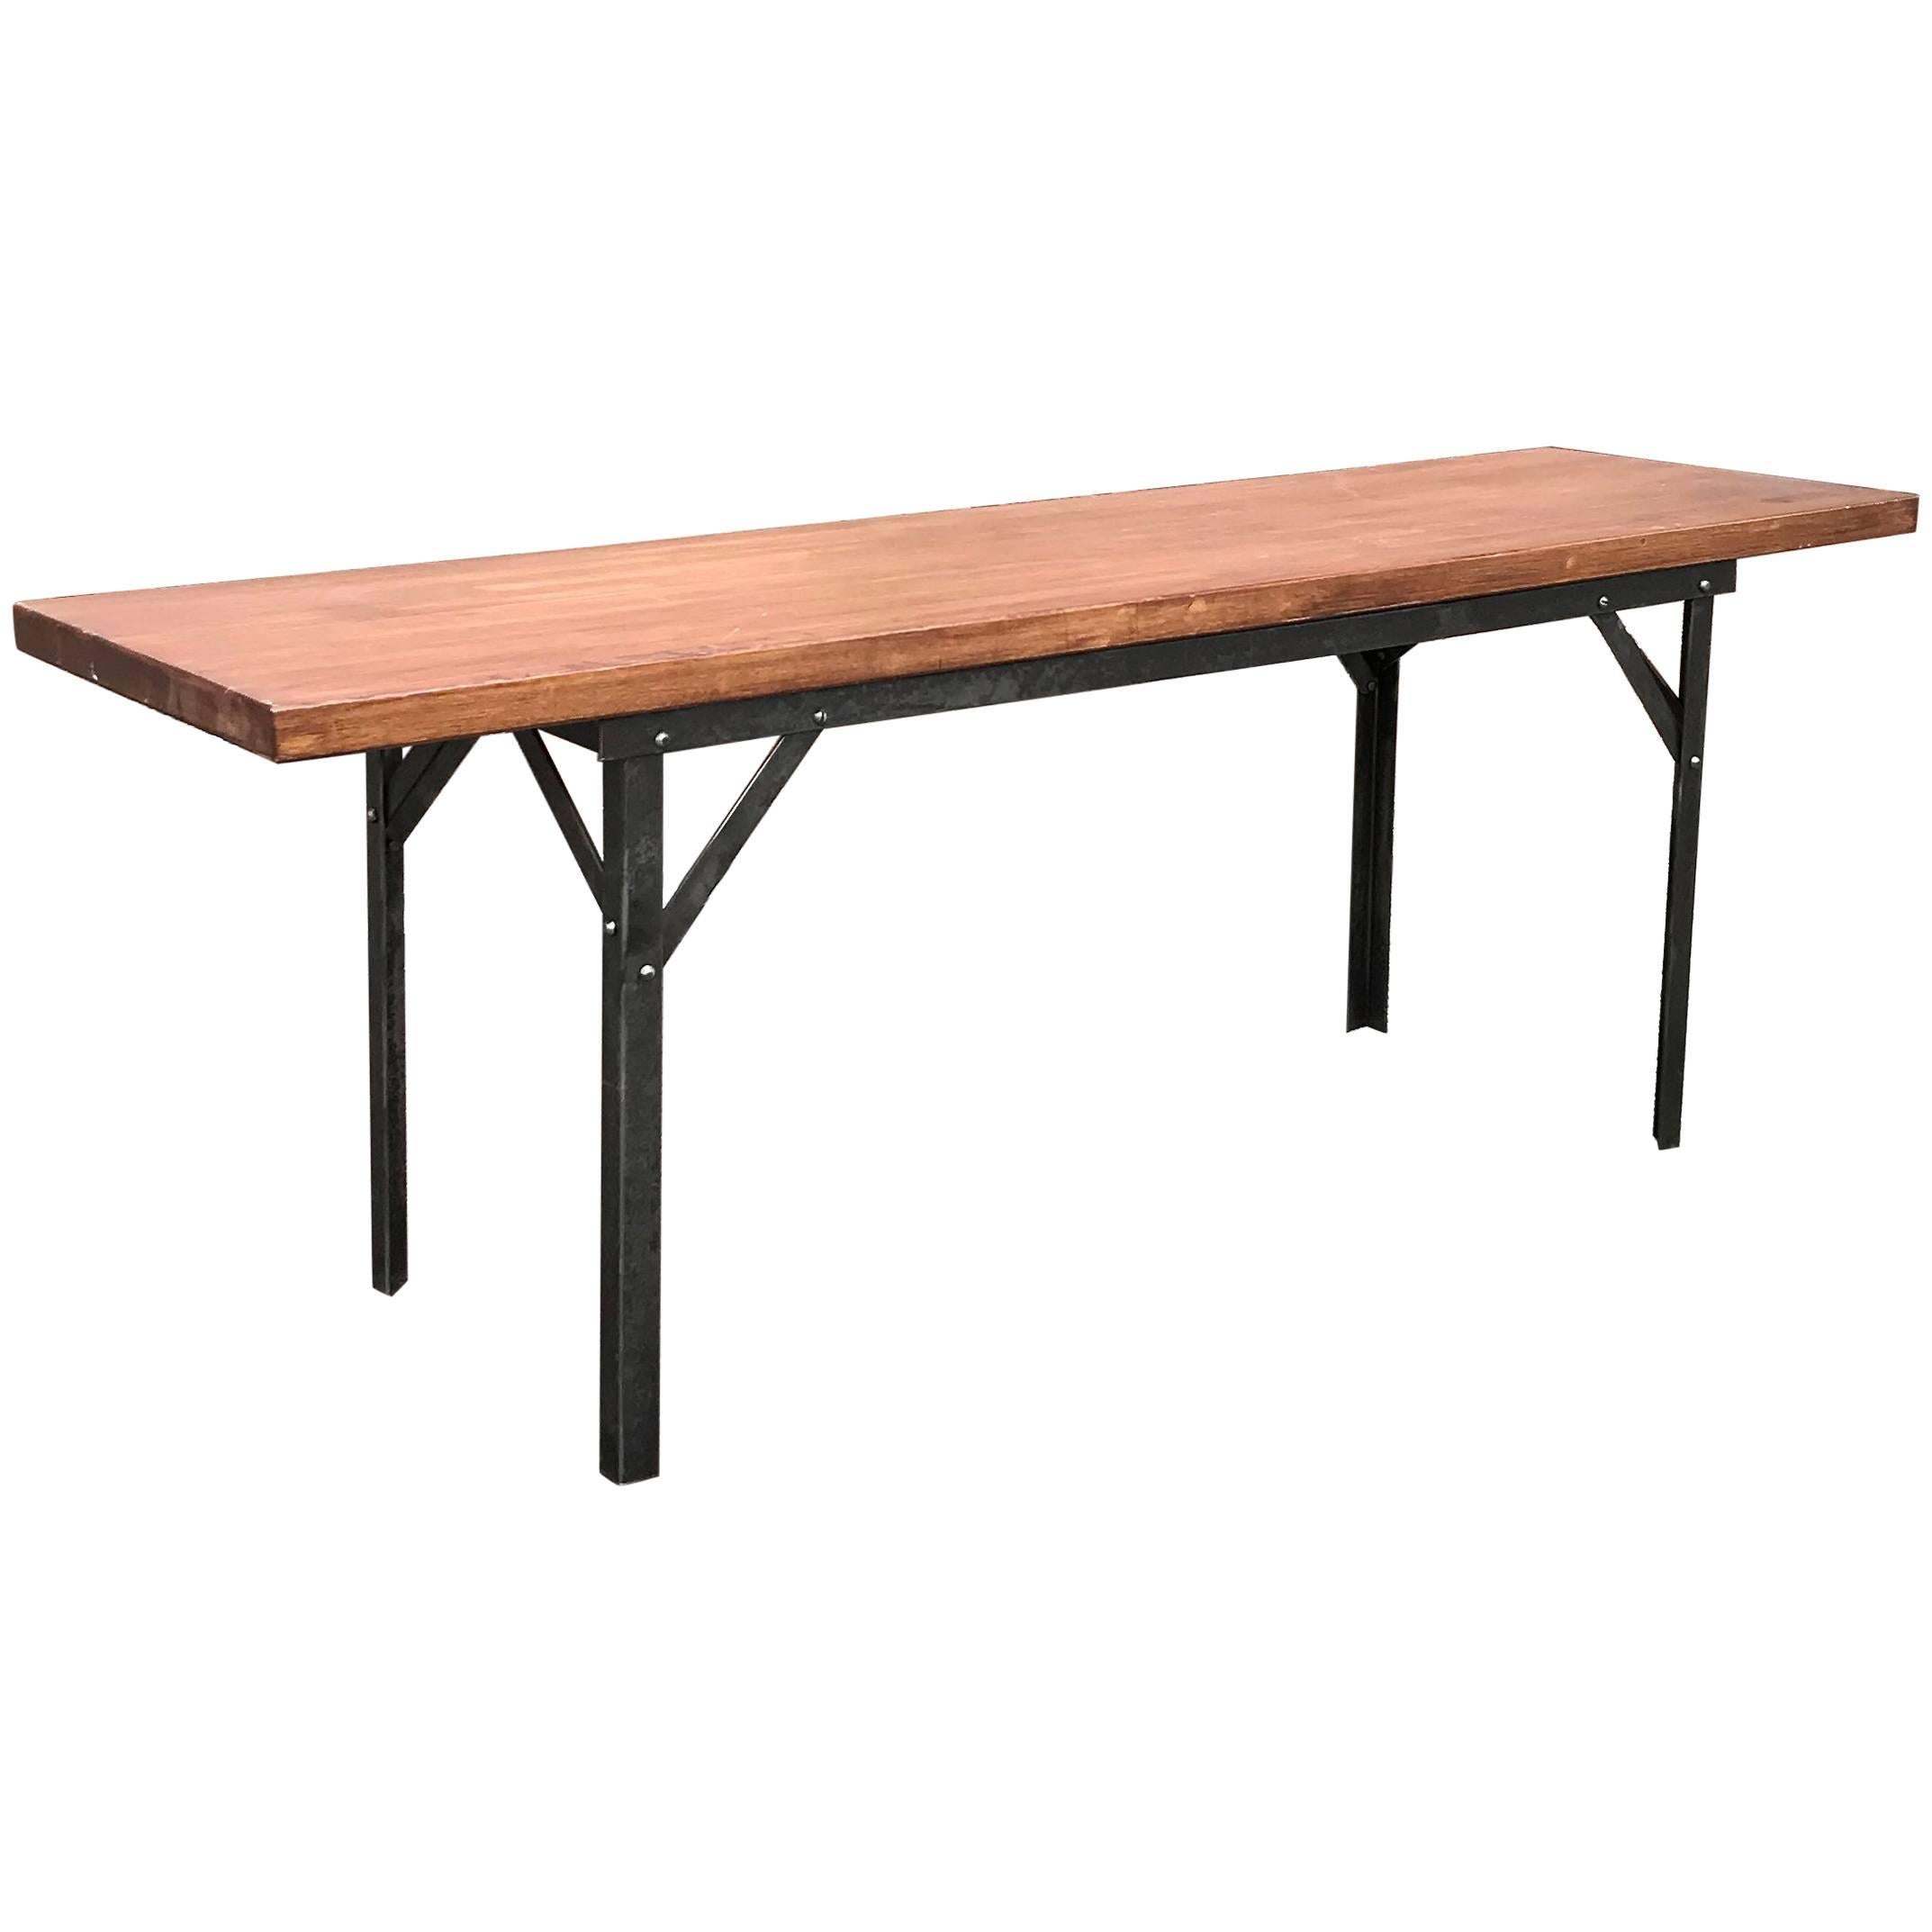 Industrial Angle Iron and Maple Block Bench